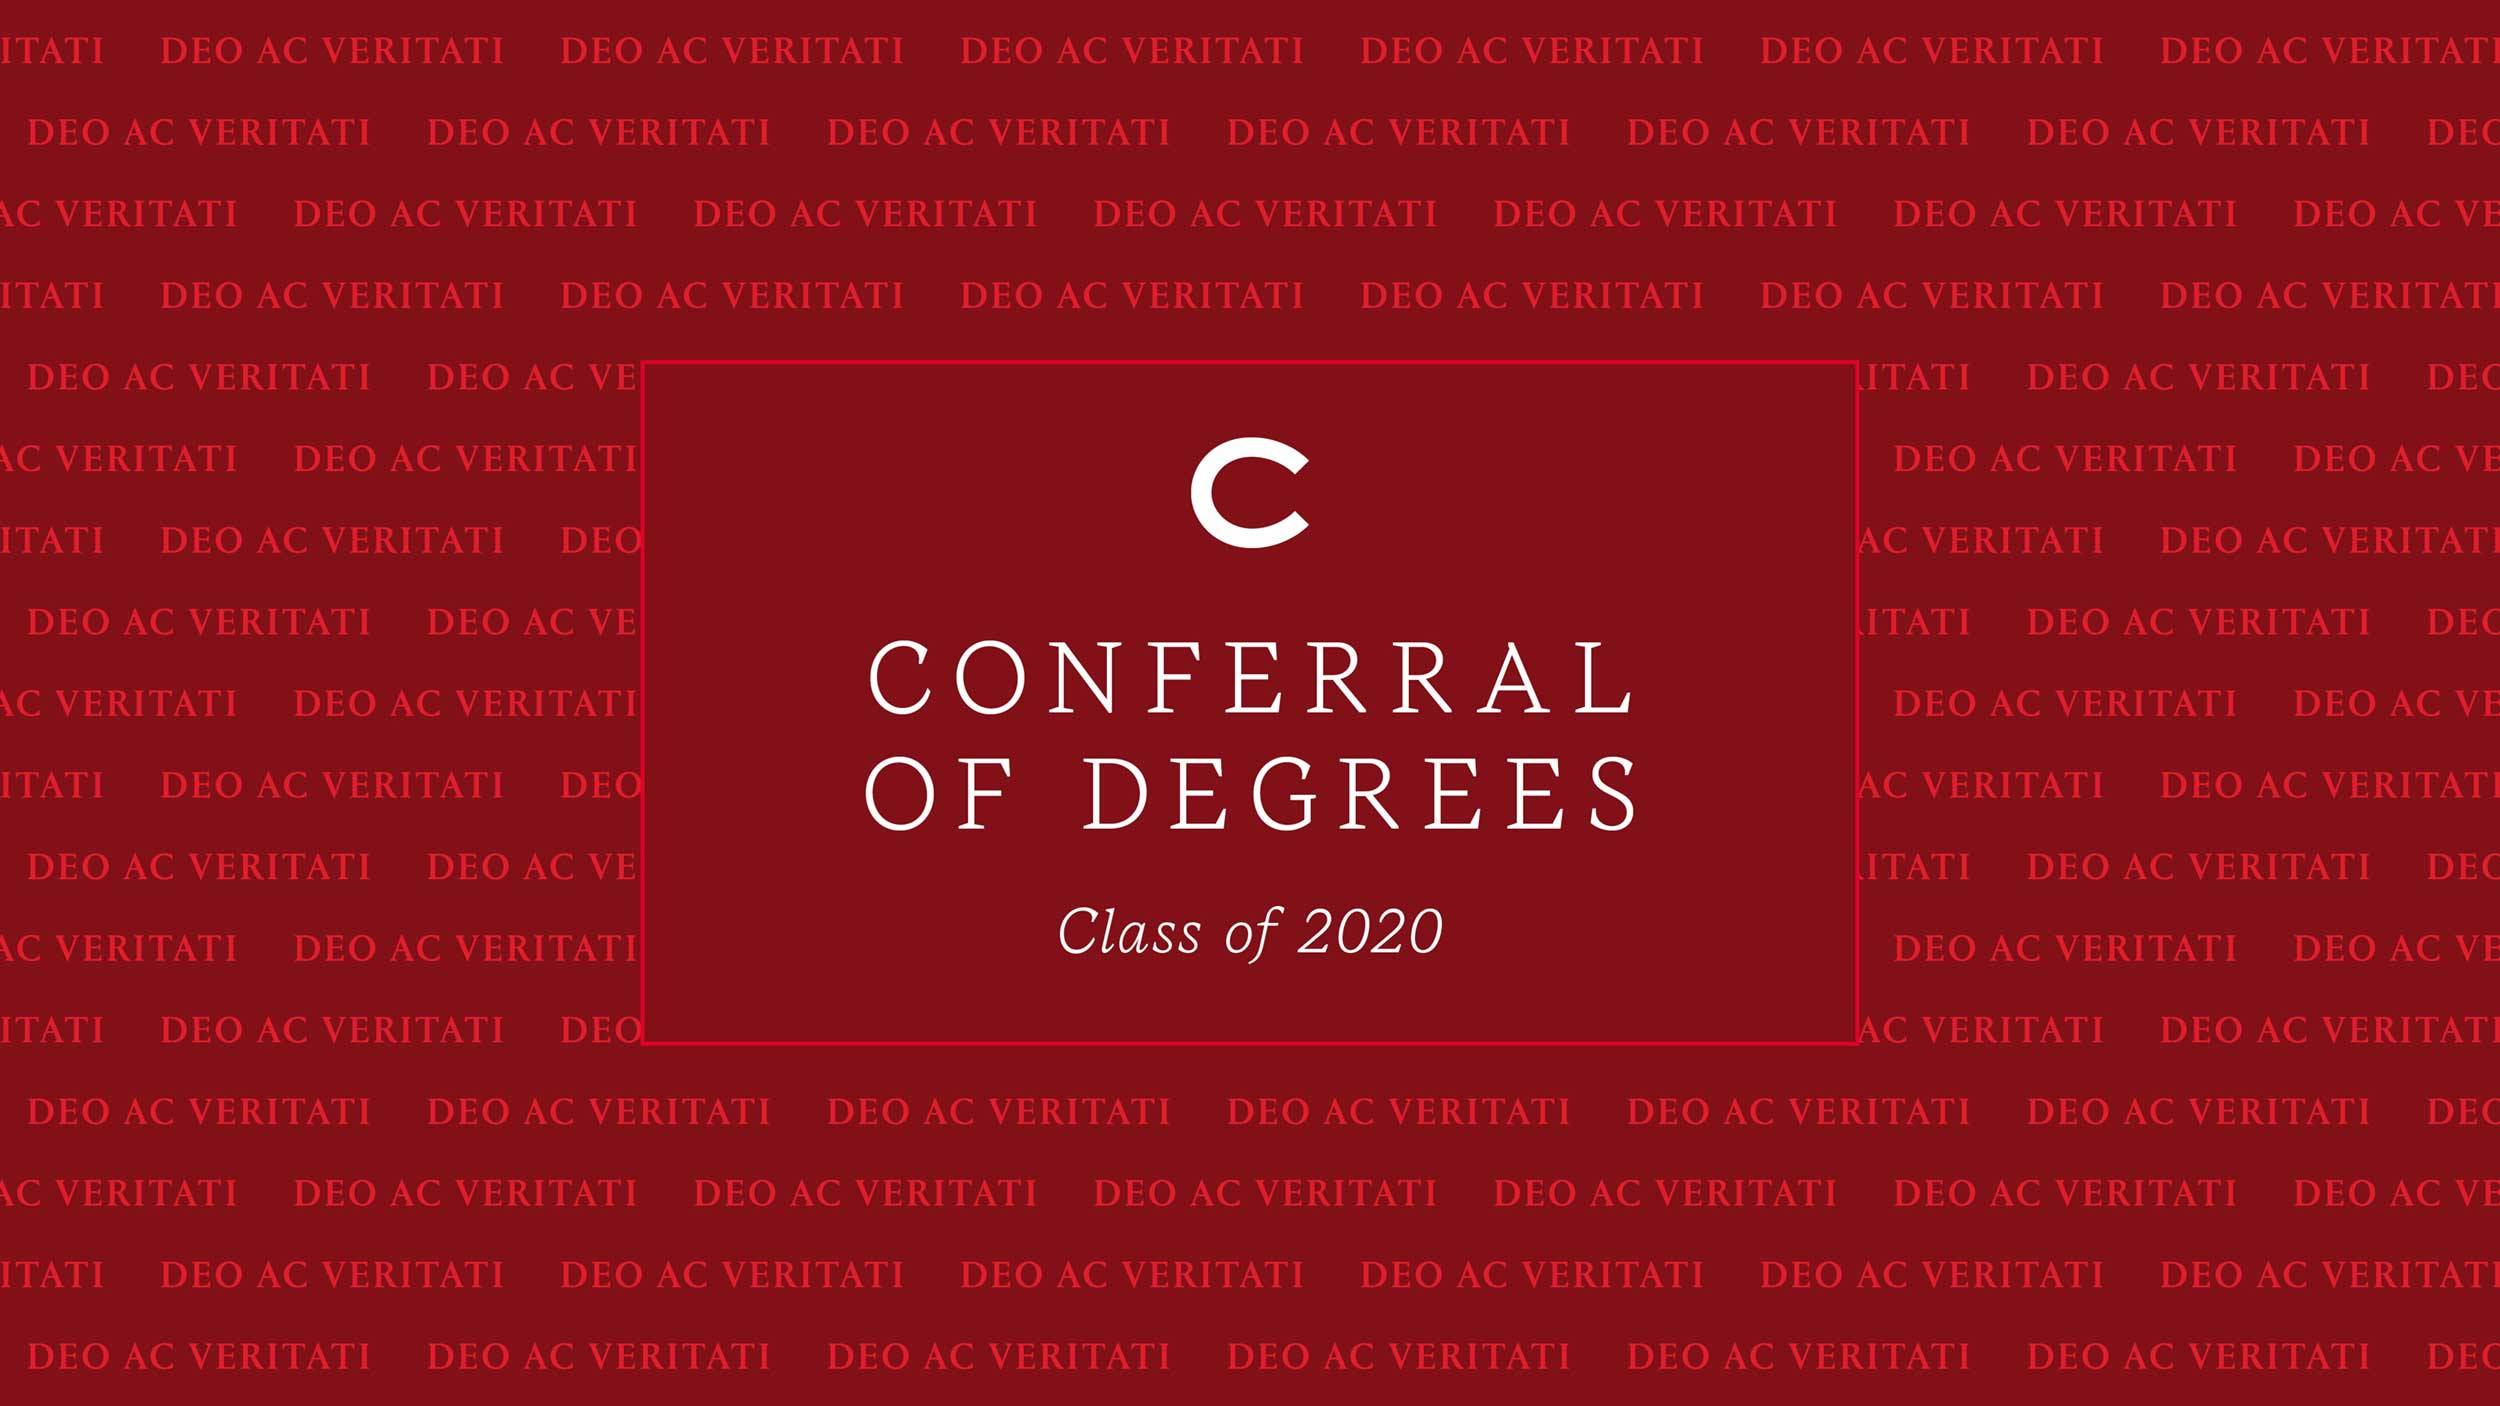 Conferral of Degrees Graphic